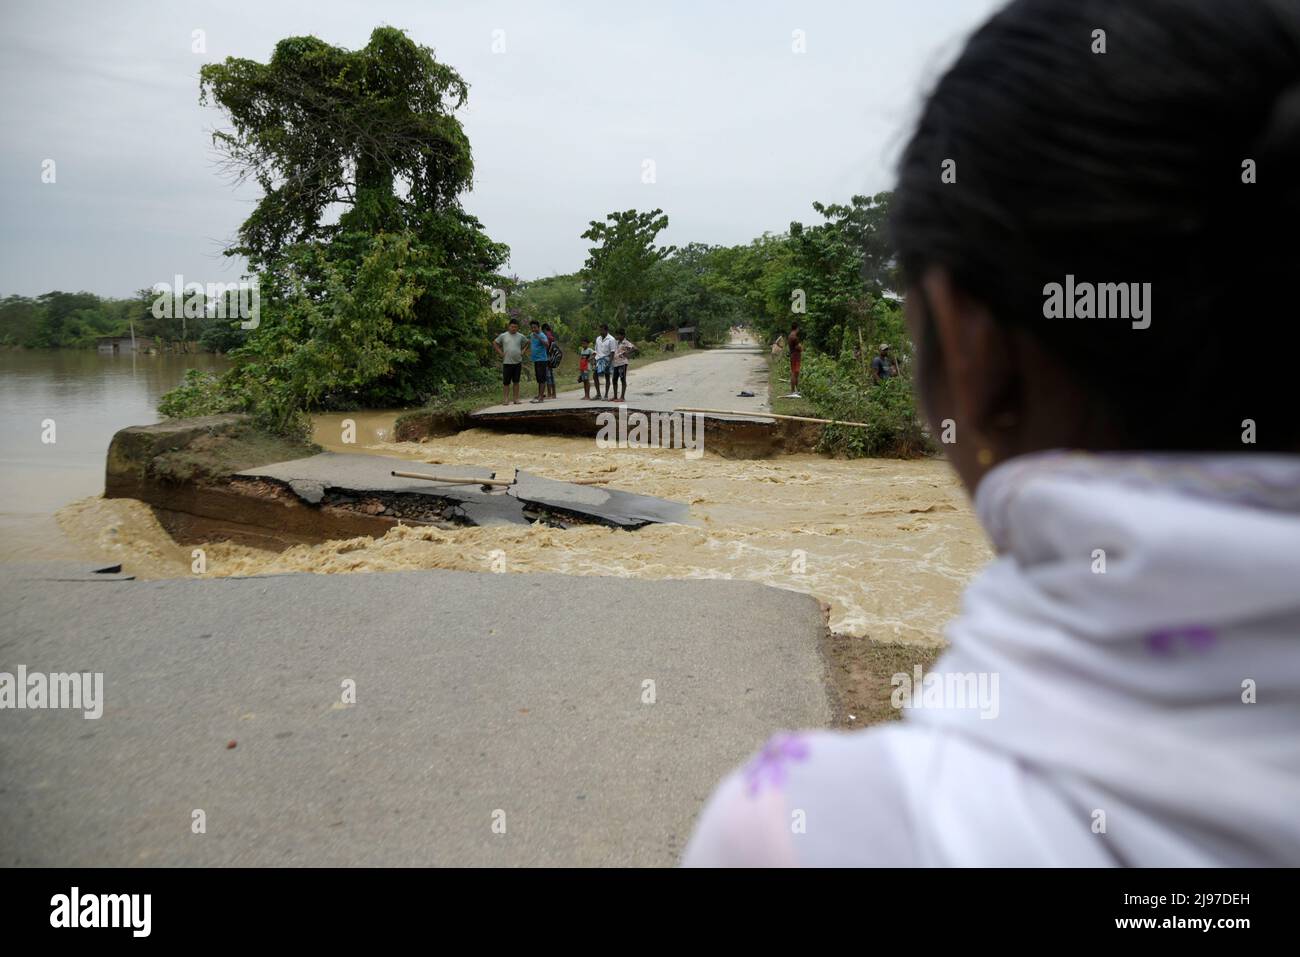 Assam, India. 20th May, 2022. Villagers standing near a damaged road after flooding flowing heavy rainfall, in Nagaon, Assam, India on 20 May 2022. At least 10 people have died in floods and landslides due to pre monsoon rain in Assam. Credit: David Talukdar/Alamy Live News Credit: David Talukdar/Alamy Live News Stock Photo